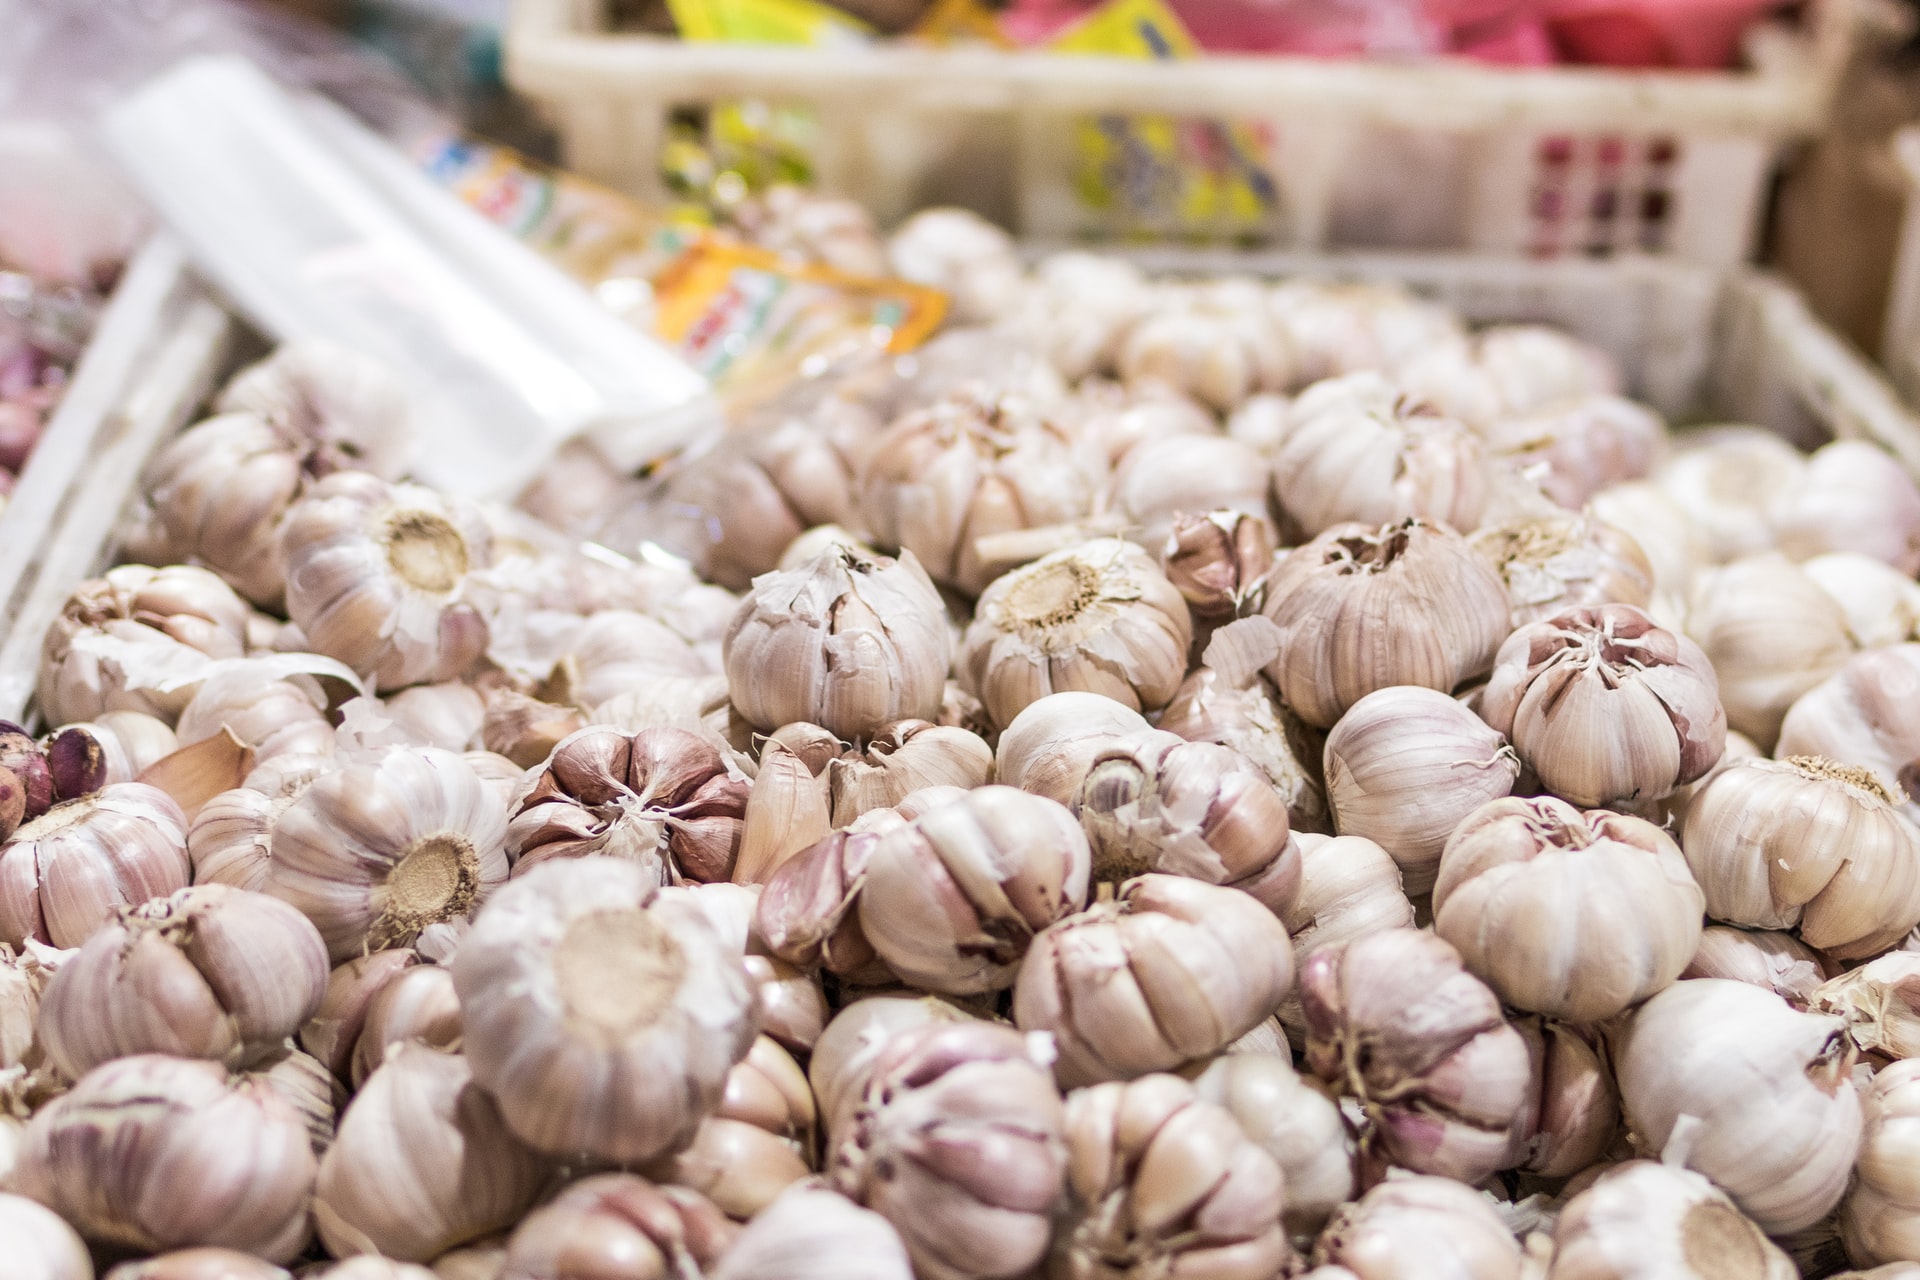  Grow garlic indoors with these easy tips